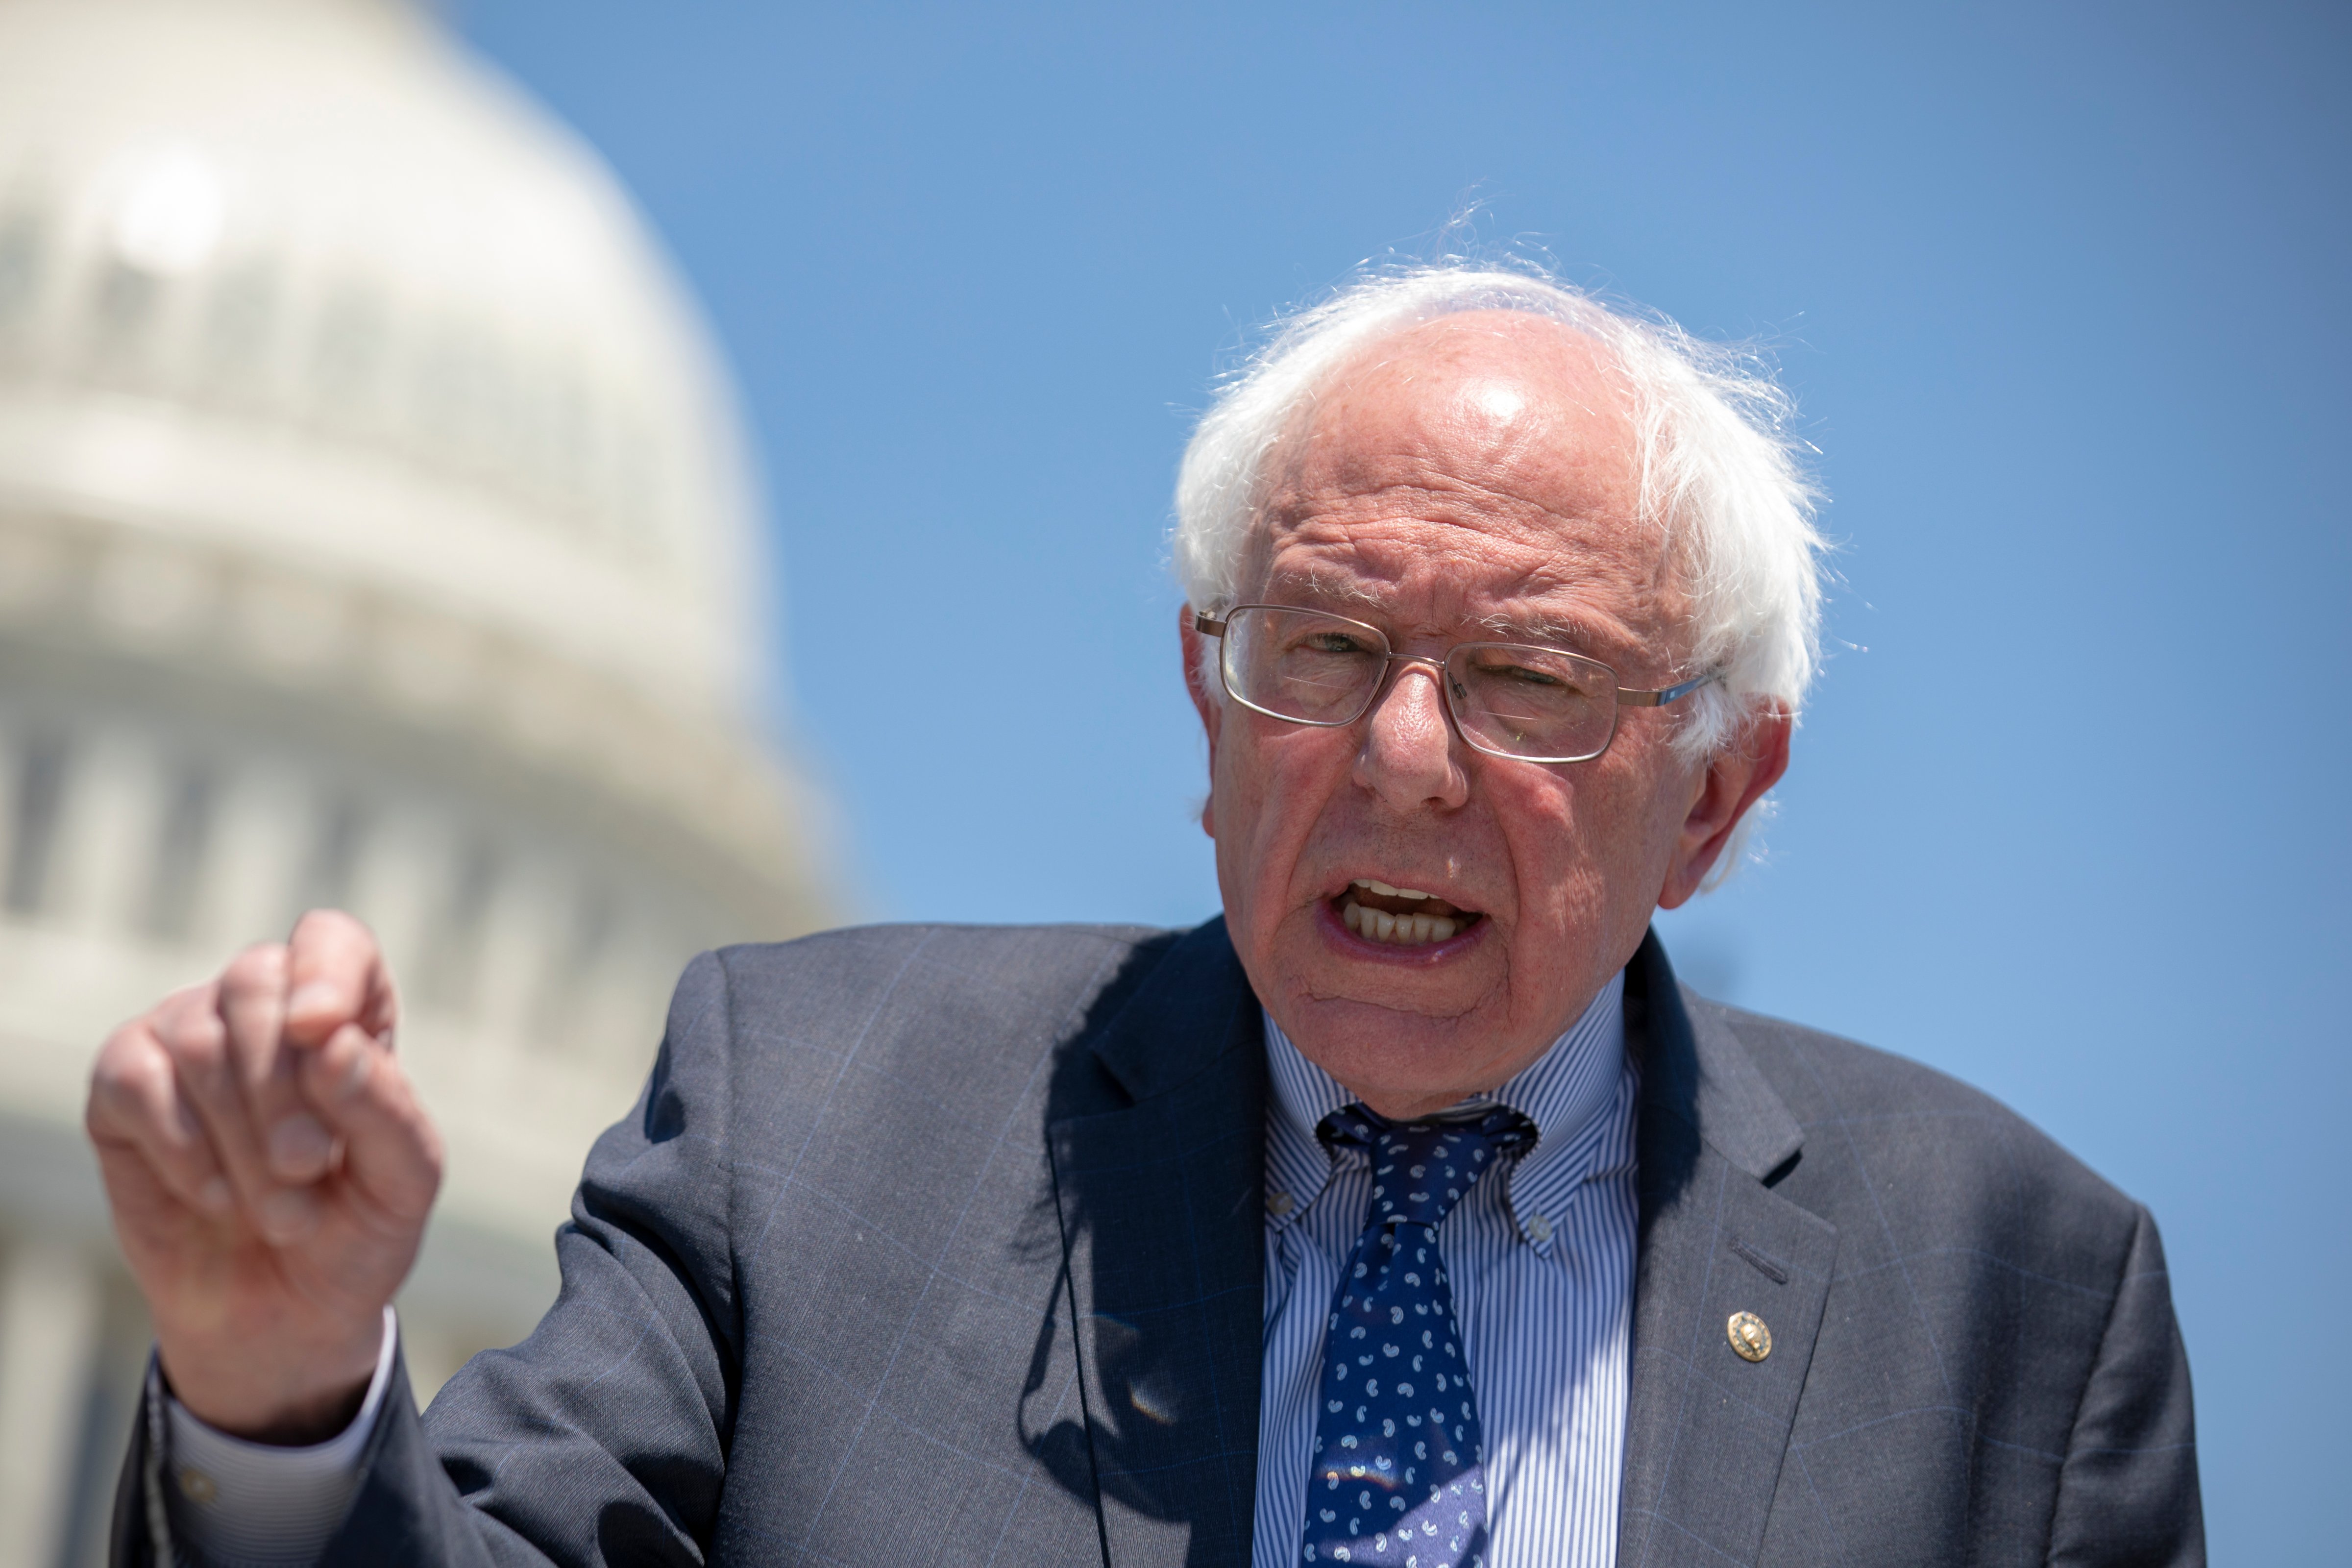 Sen. Bernie Sanders (I-VT) speaks during a news conference regarding the separation of immigrant children at the U.S. Capitol on July 10, 2018 in Washington, DC. (Alex Edelman—Getty Images)